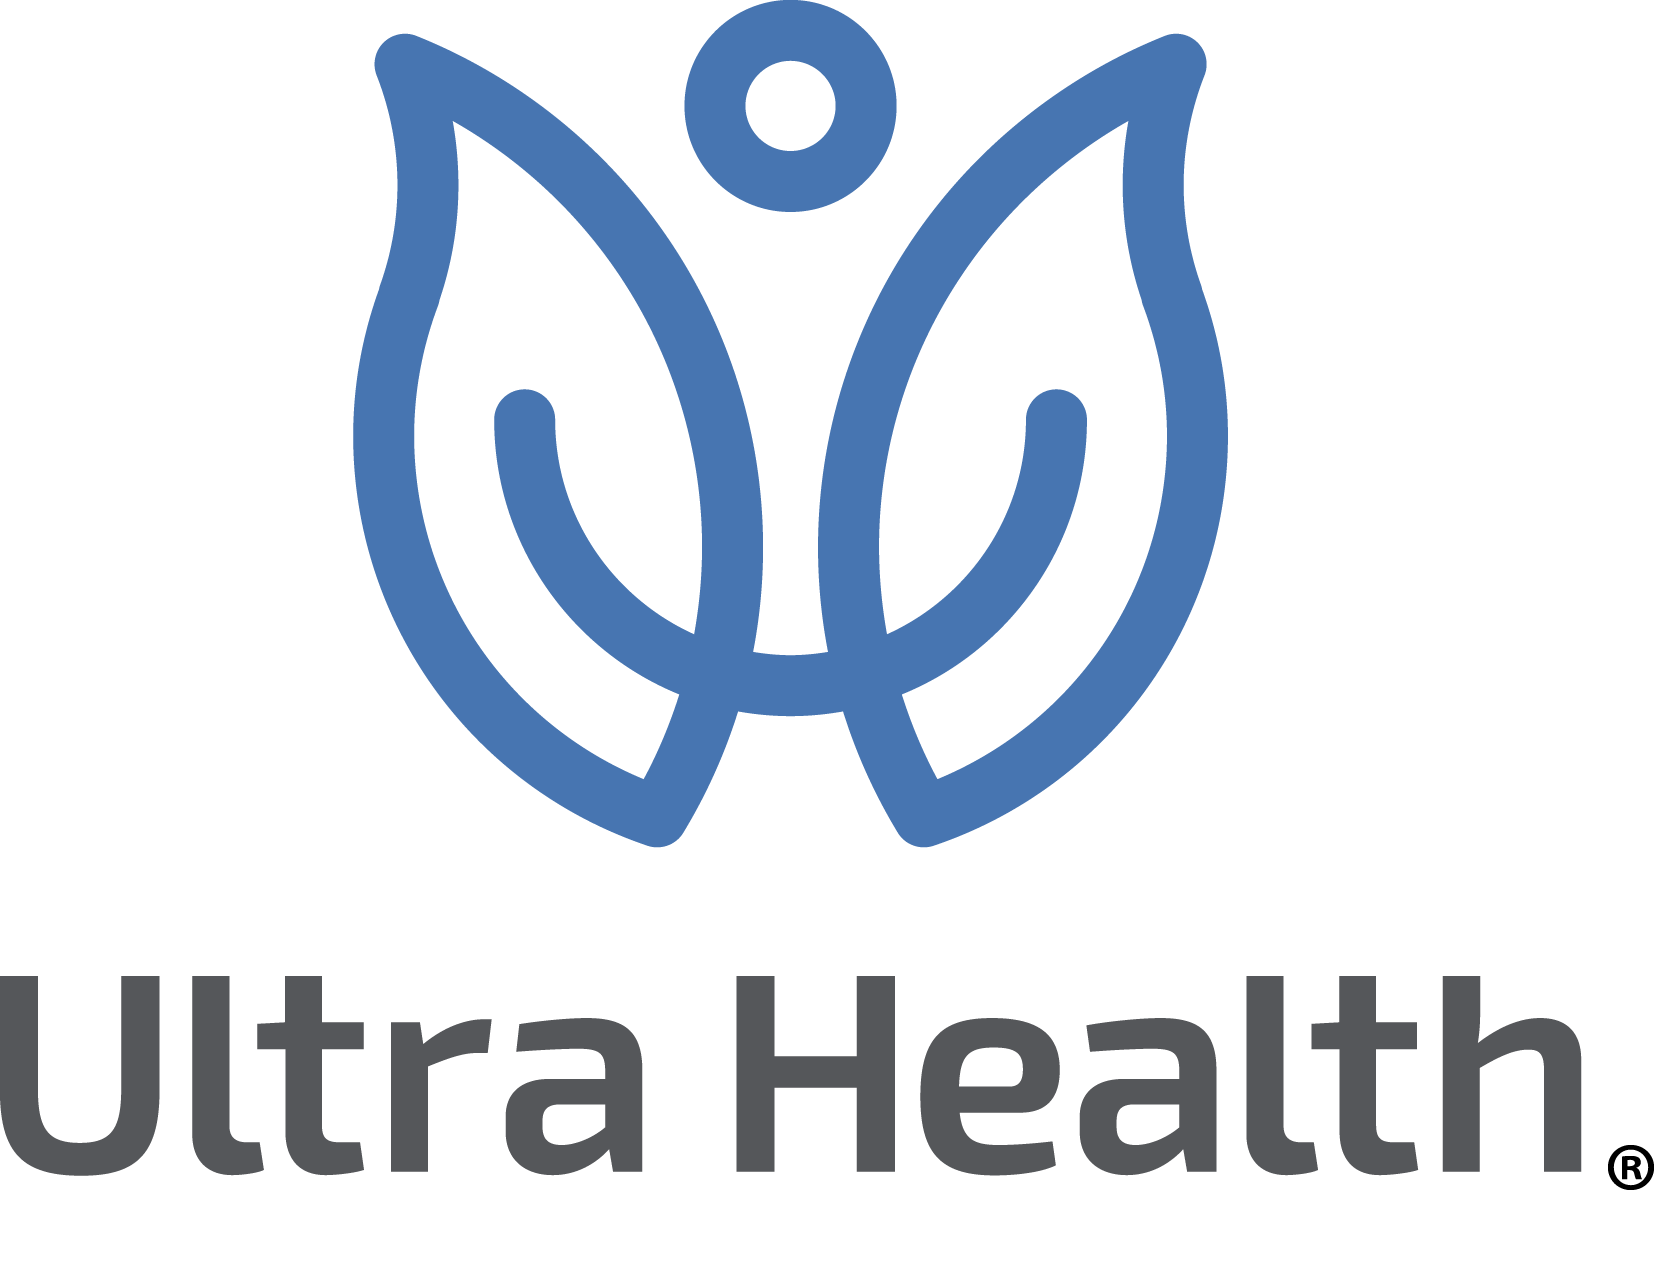 Ultra Health Opens Eighth Location, Now in Six N.M. Counties - Ultra Health